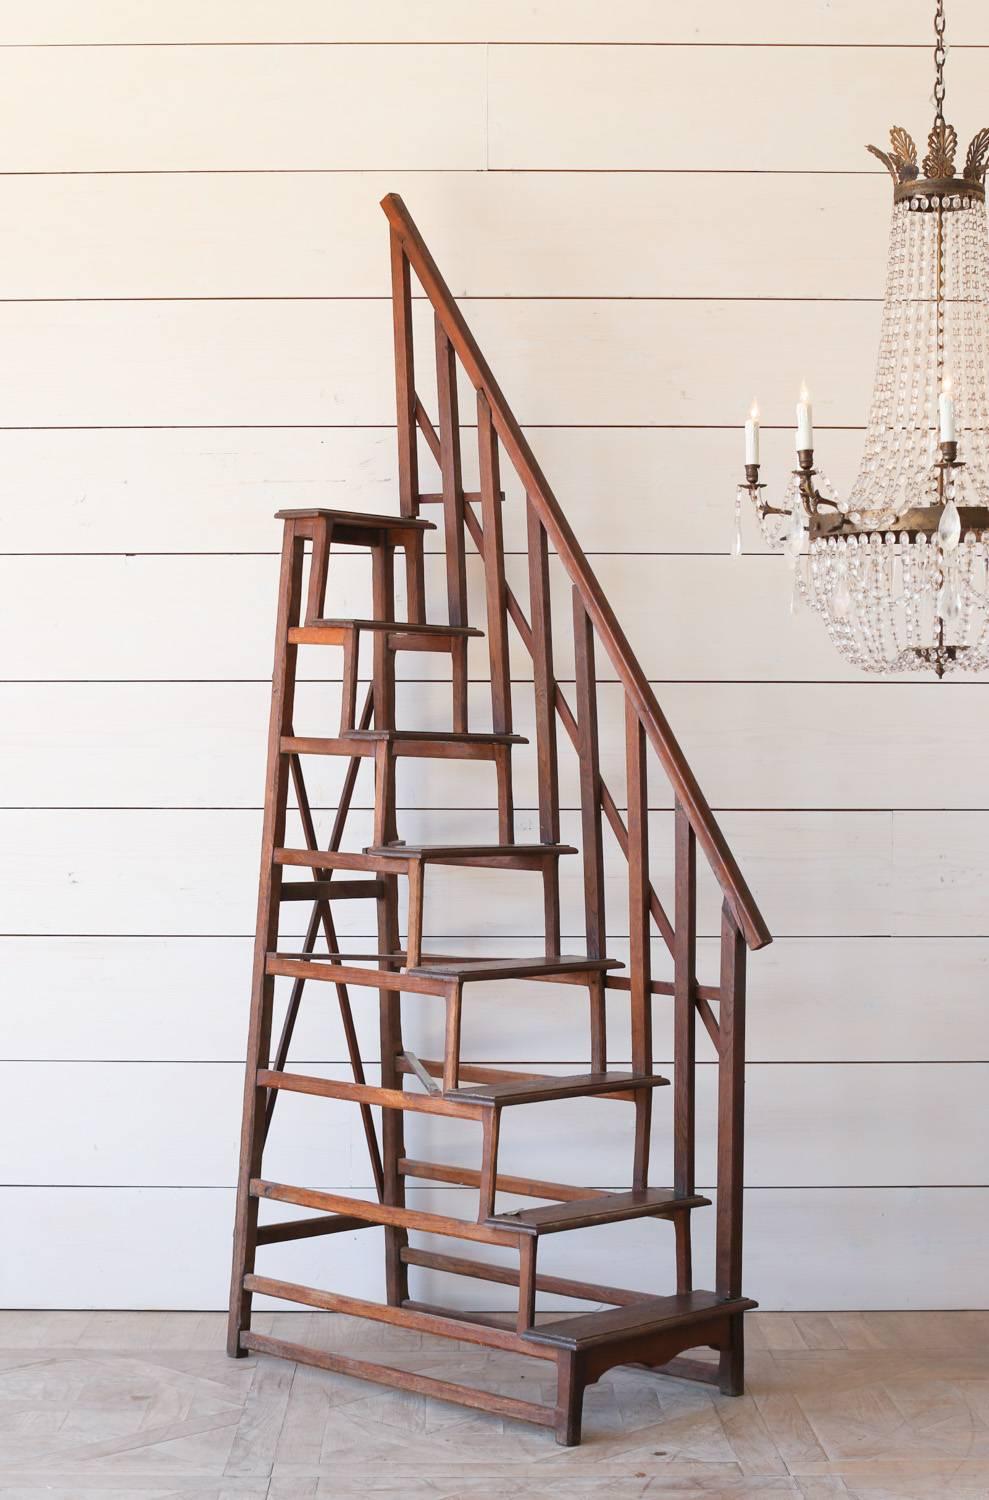 Linear antique library ladder in natural wood finish. This unique piece is from the area of Nimes, Provence and was used to access books on taller shelves. Add old world charm to your modern library, bedroom, or simply drape garments over the side